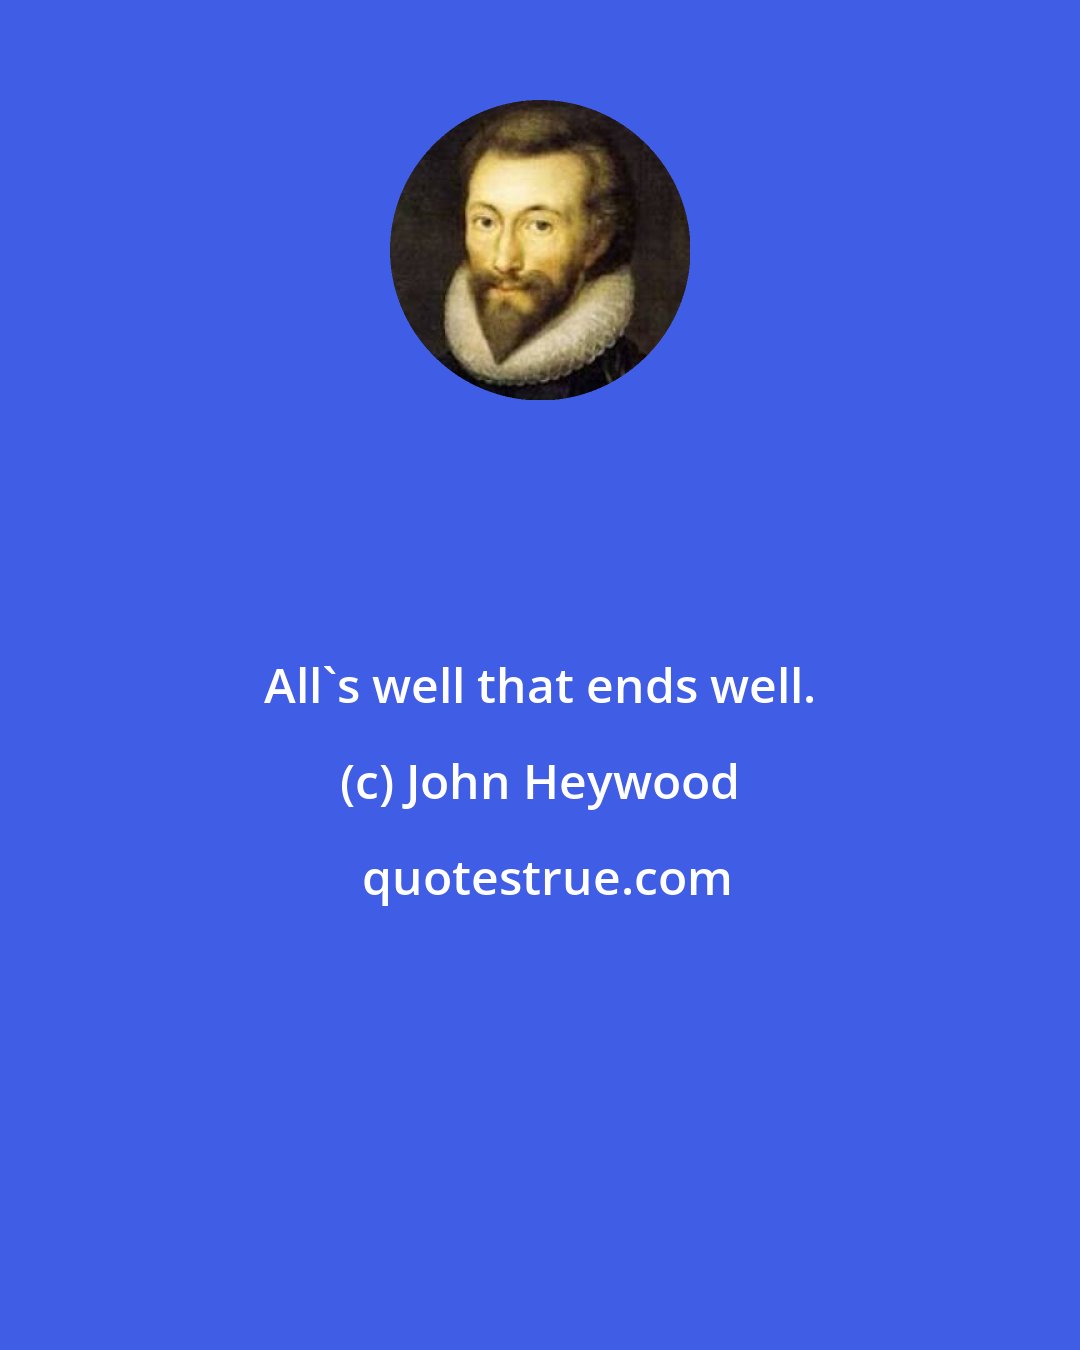 John Heywood: All's well that ends well.